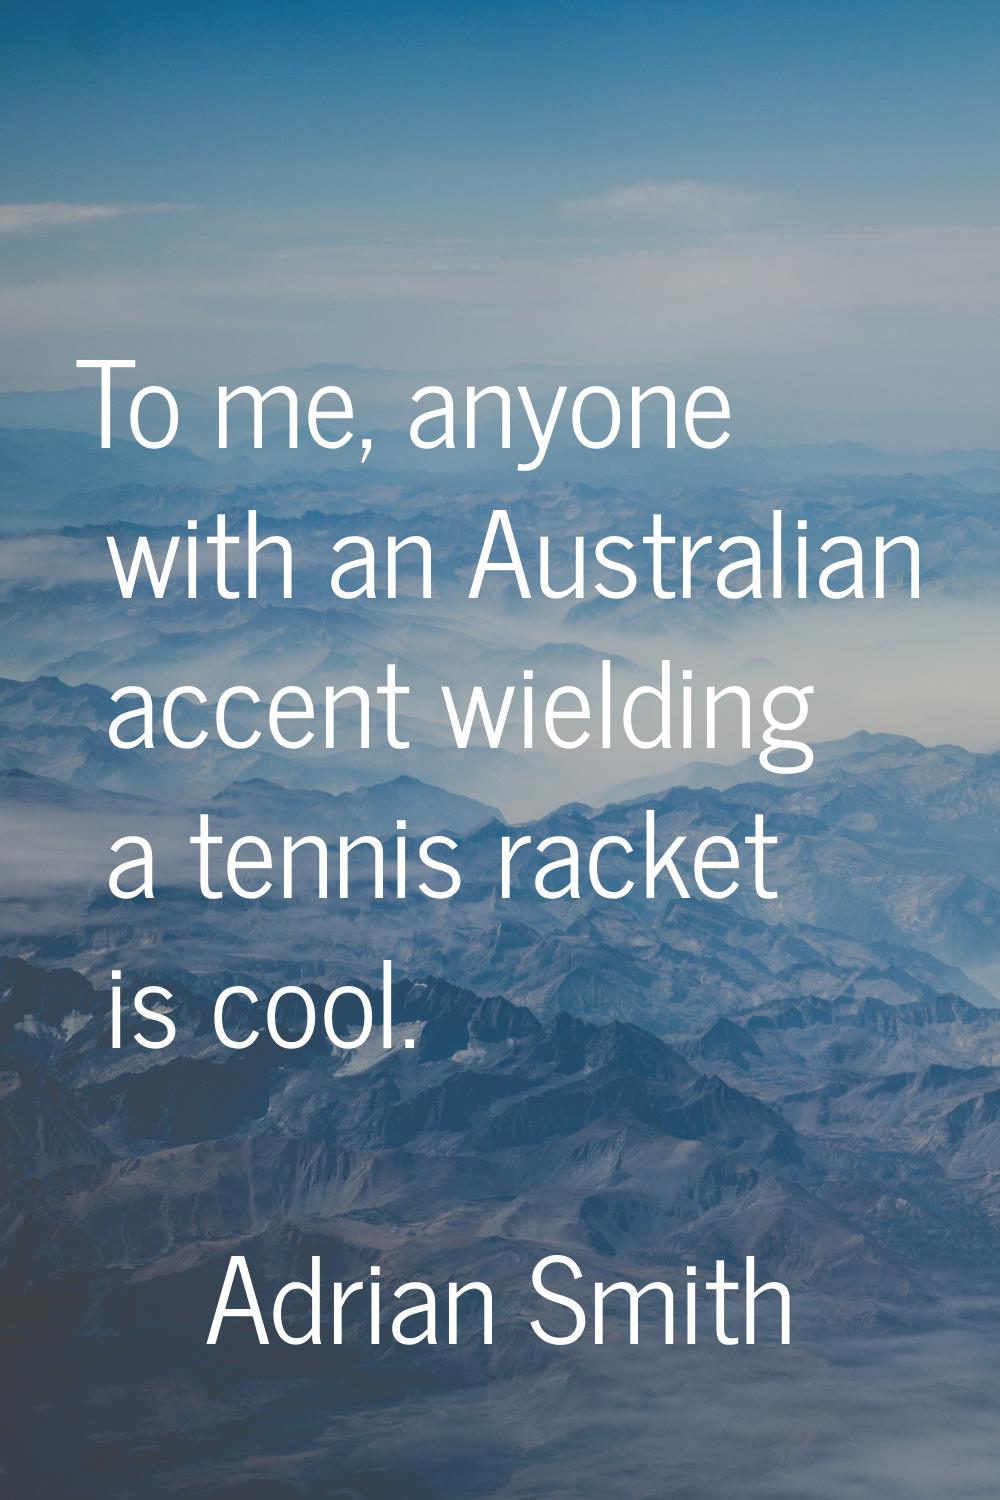 To me, anyone with an Australian accent wielding a tennis racket is cool.